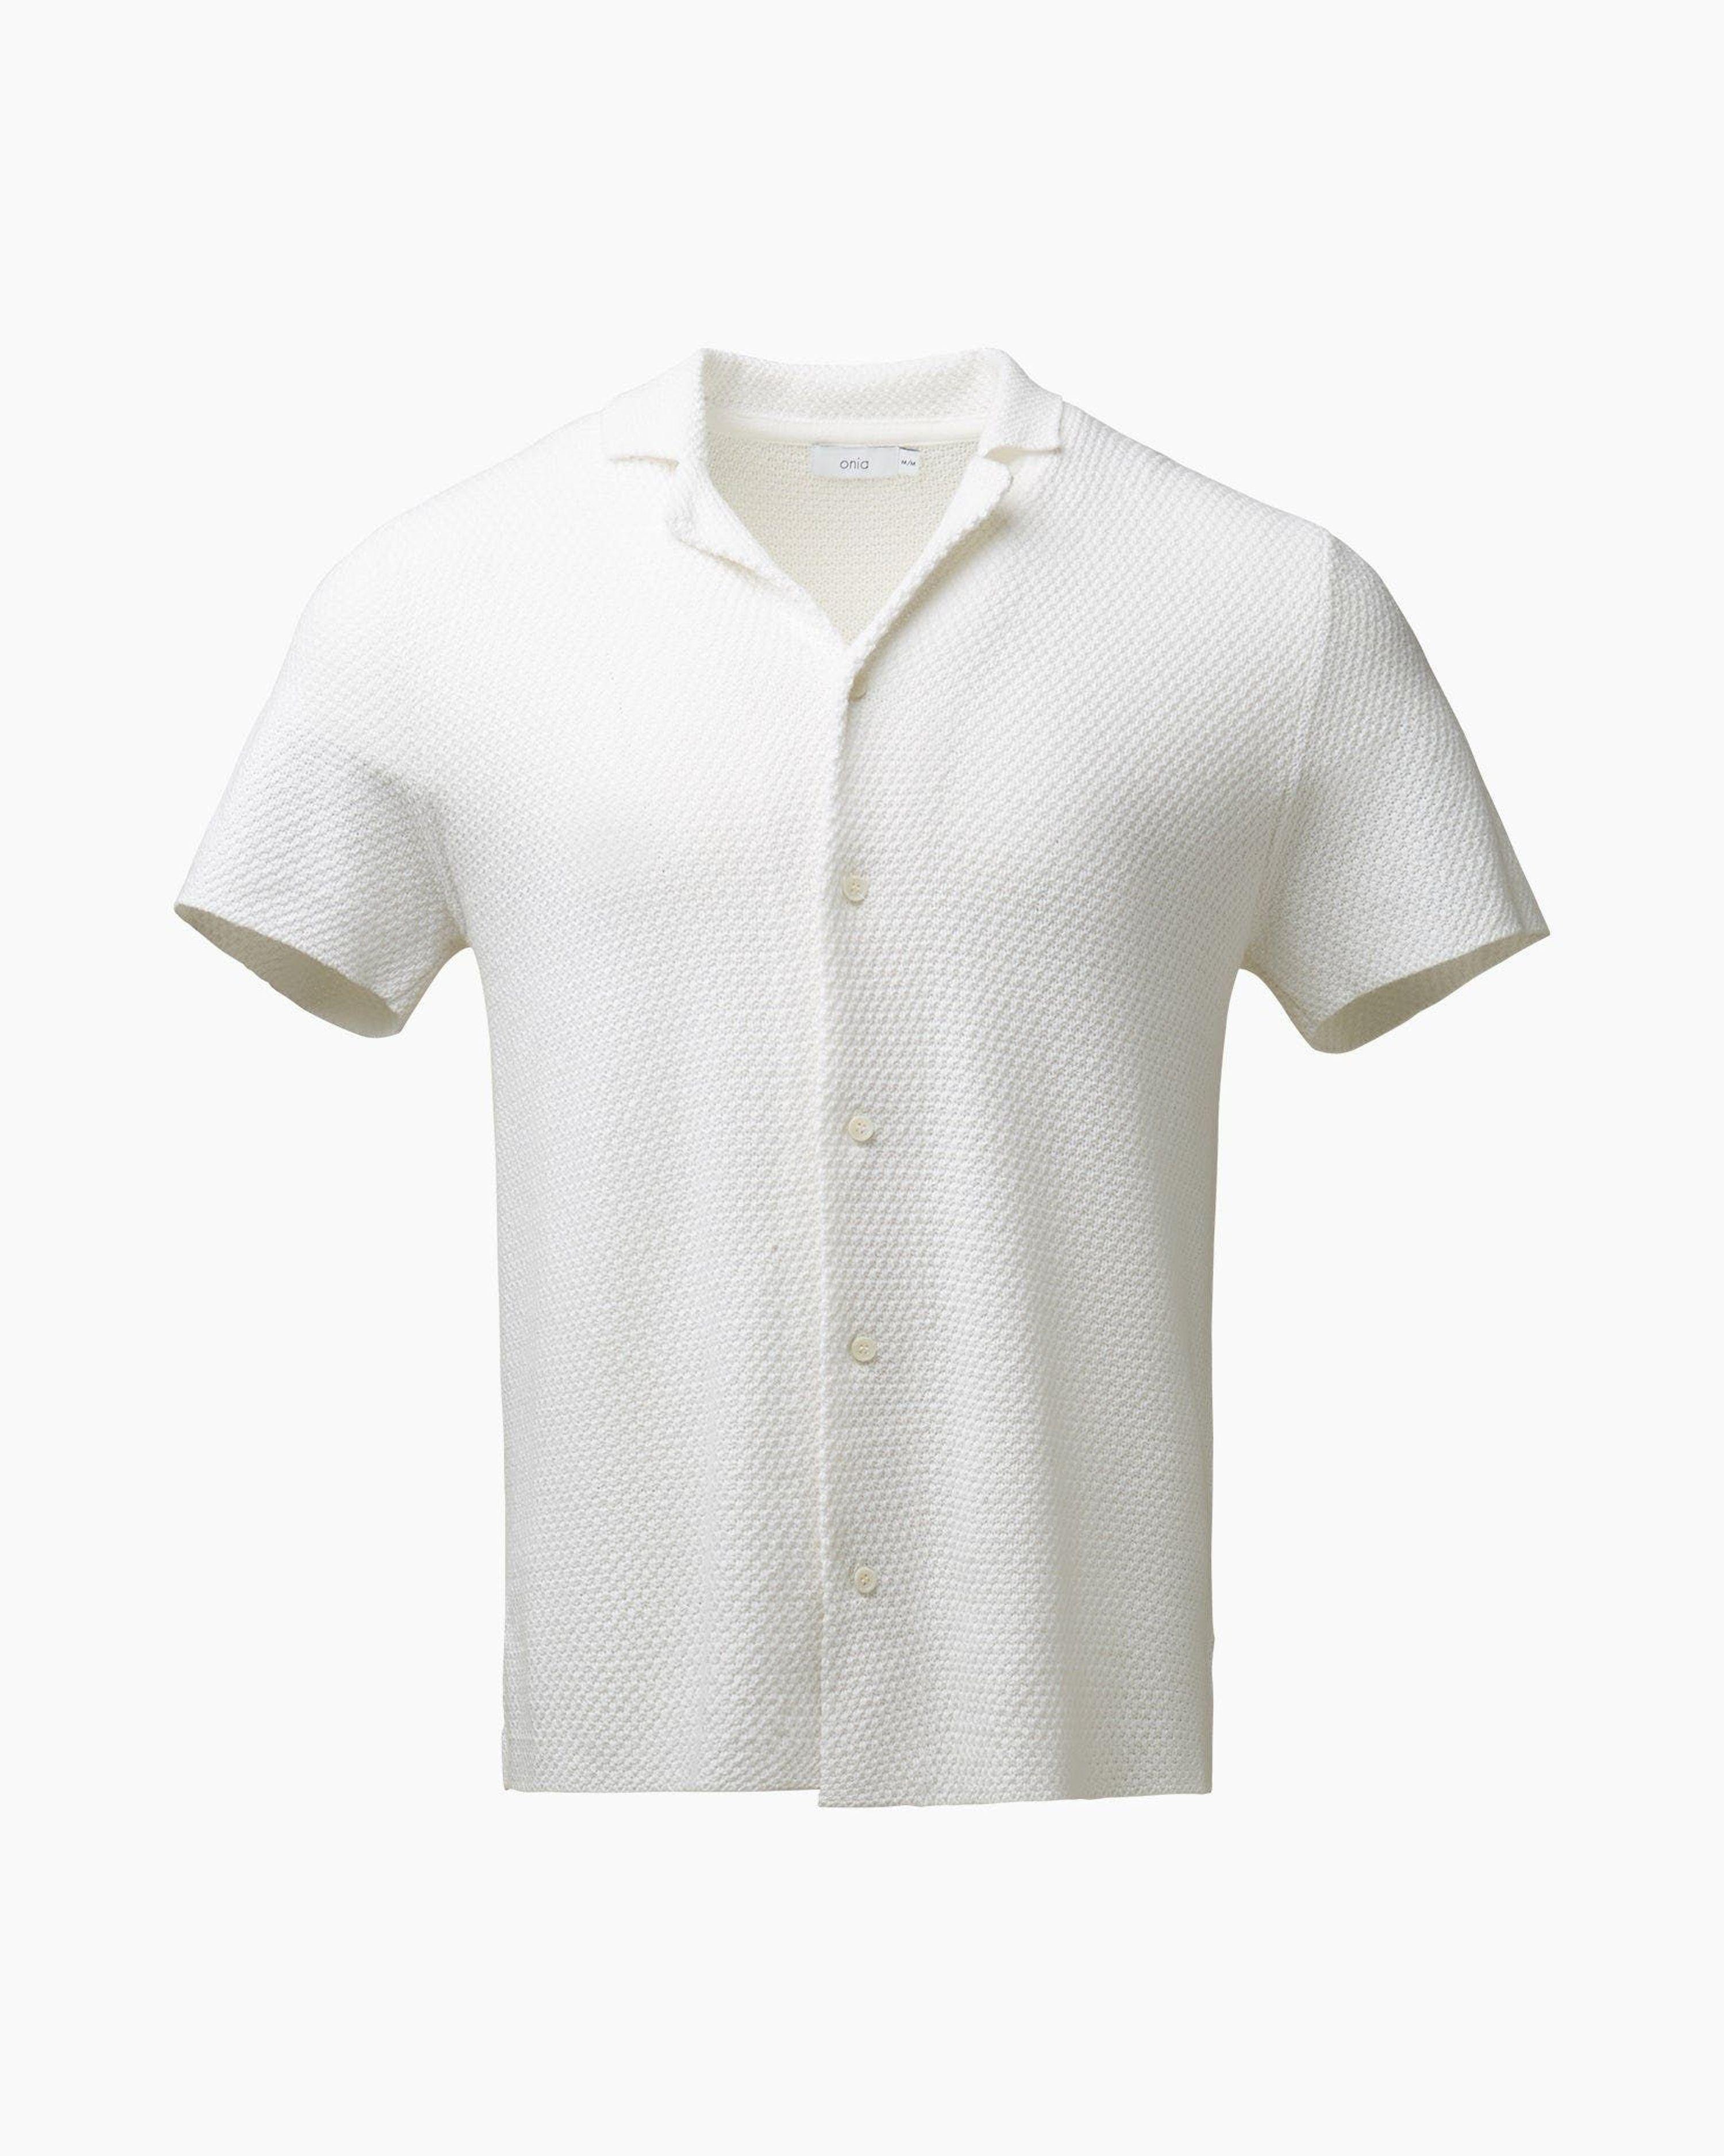 Onia Cotton Textured Camp Shirt in White for Men | Lyst